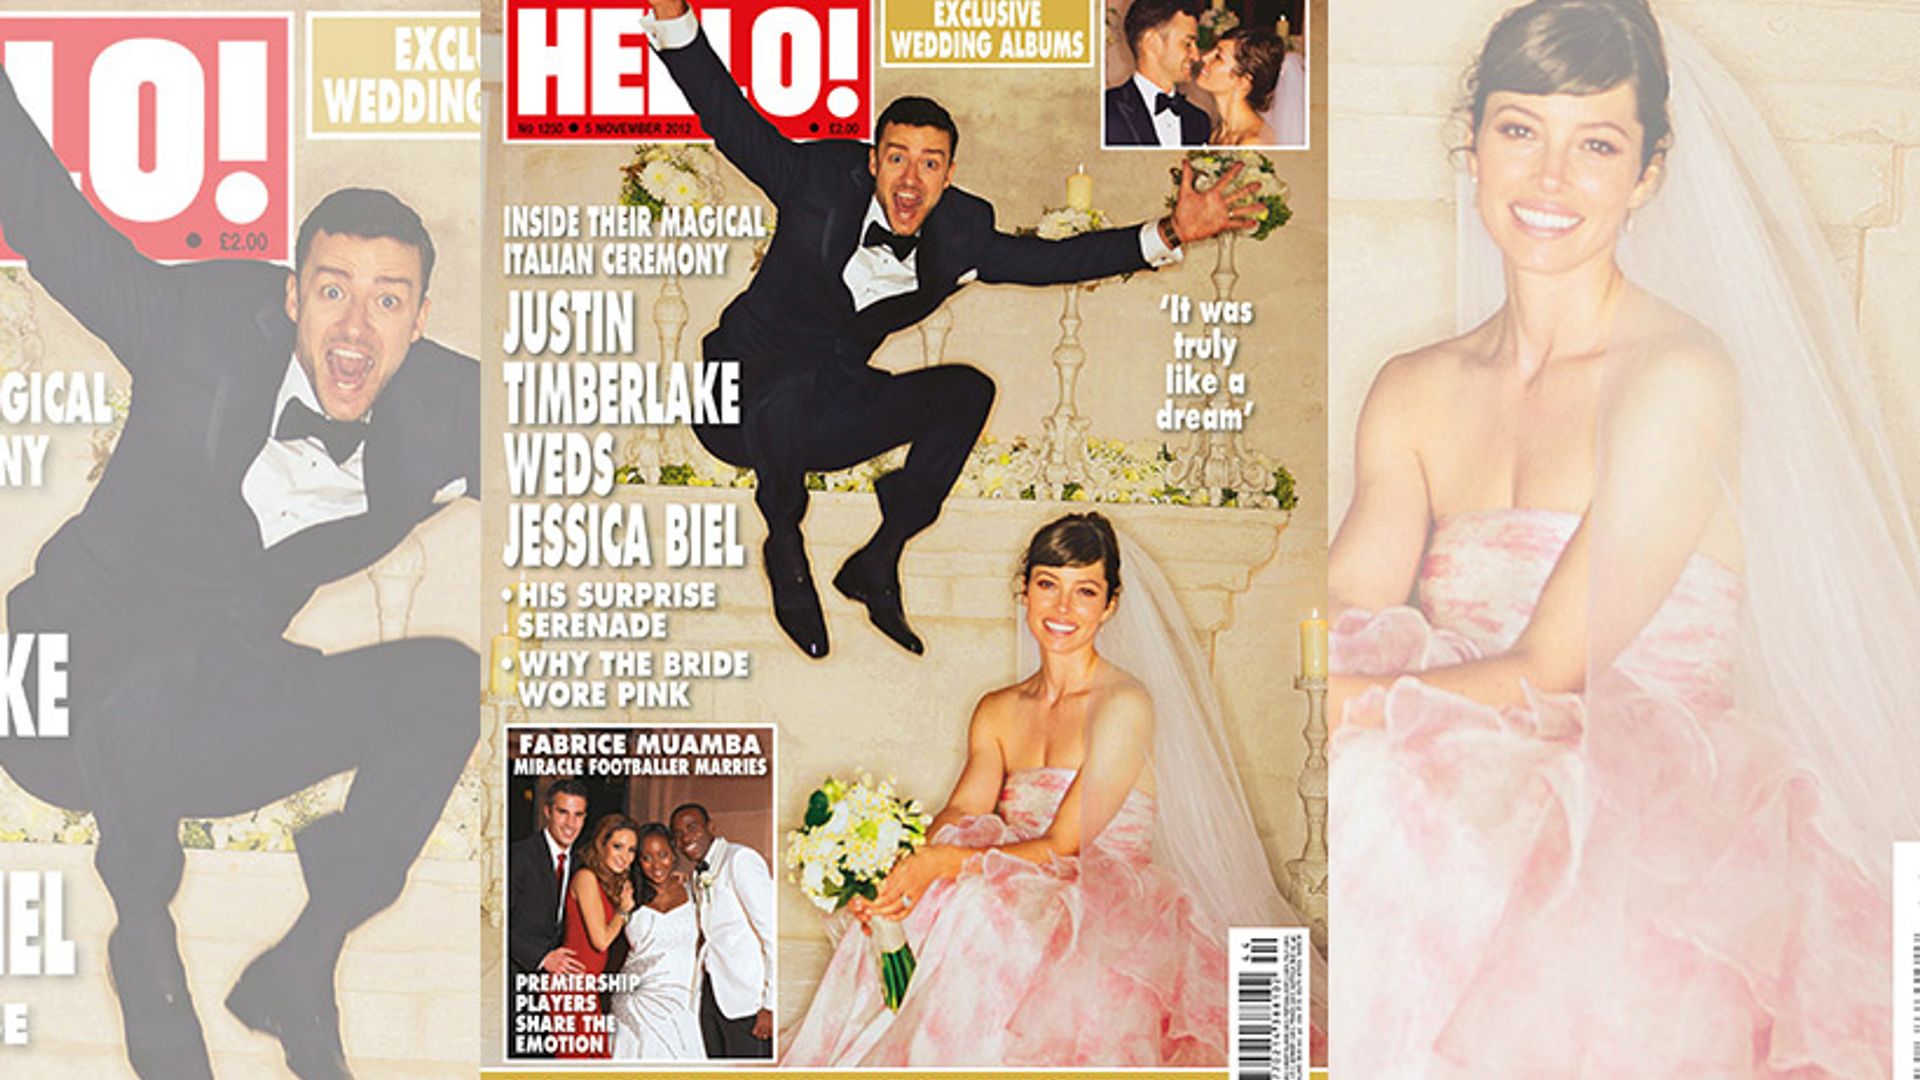 Flashback Friday: the story behind Justin Timberlake and Jessica Biel's wedding